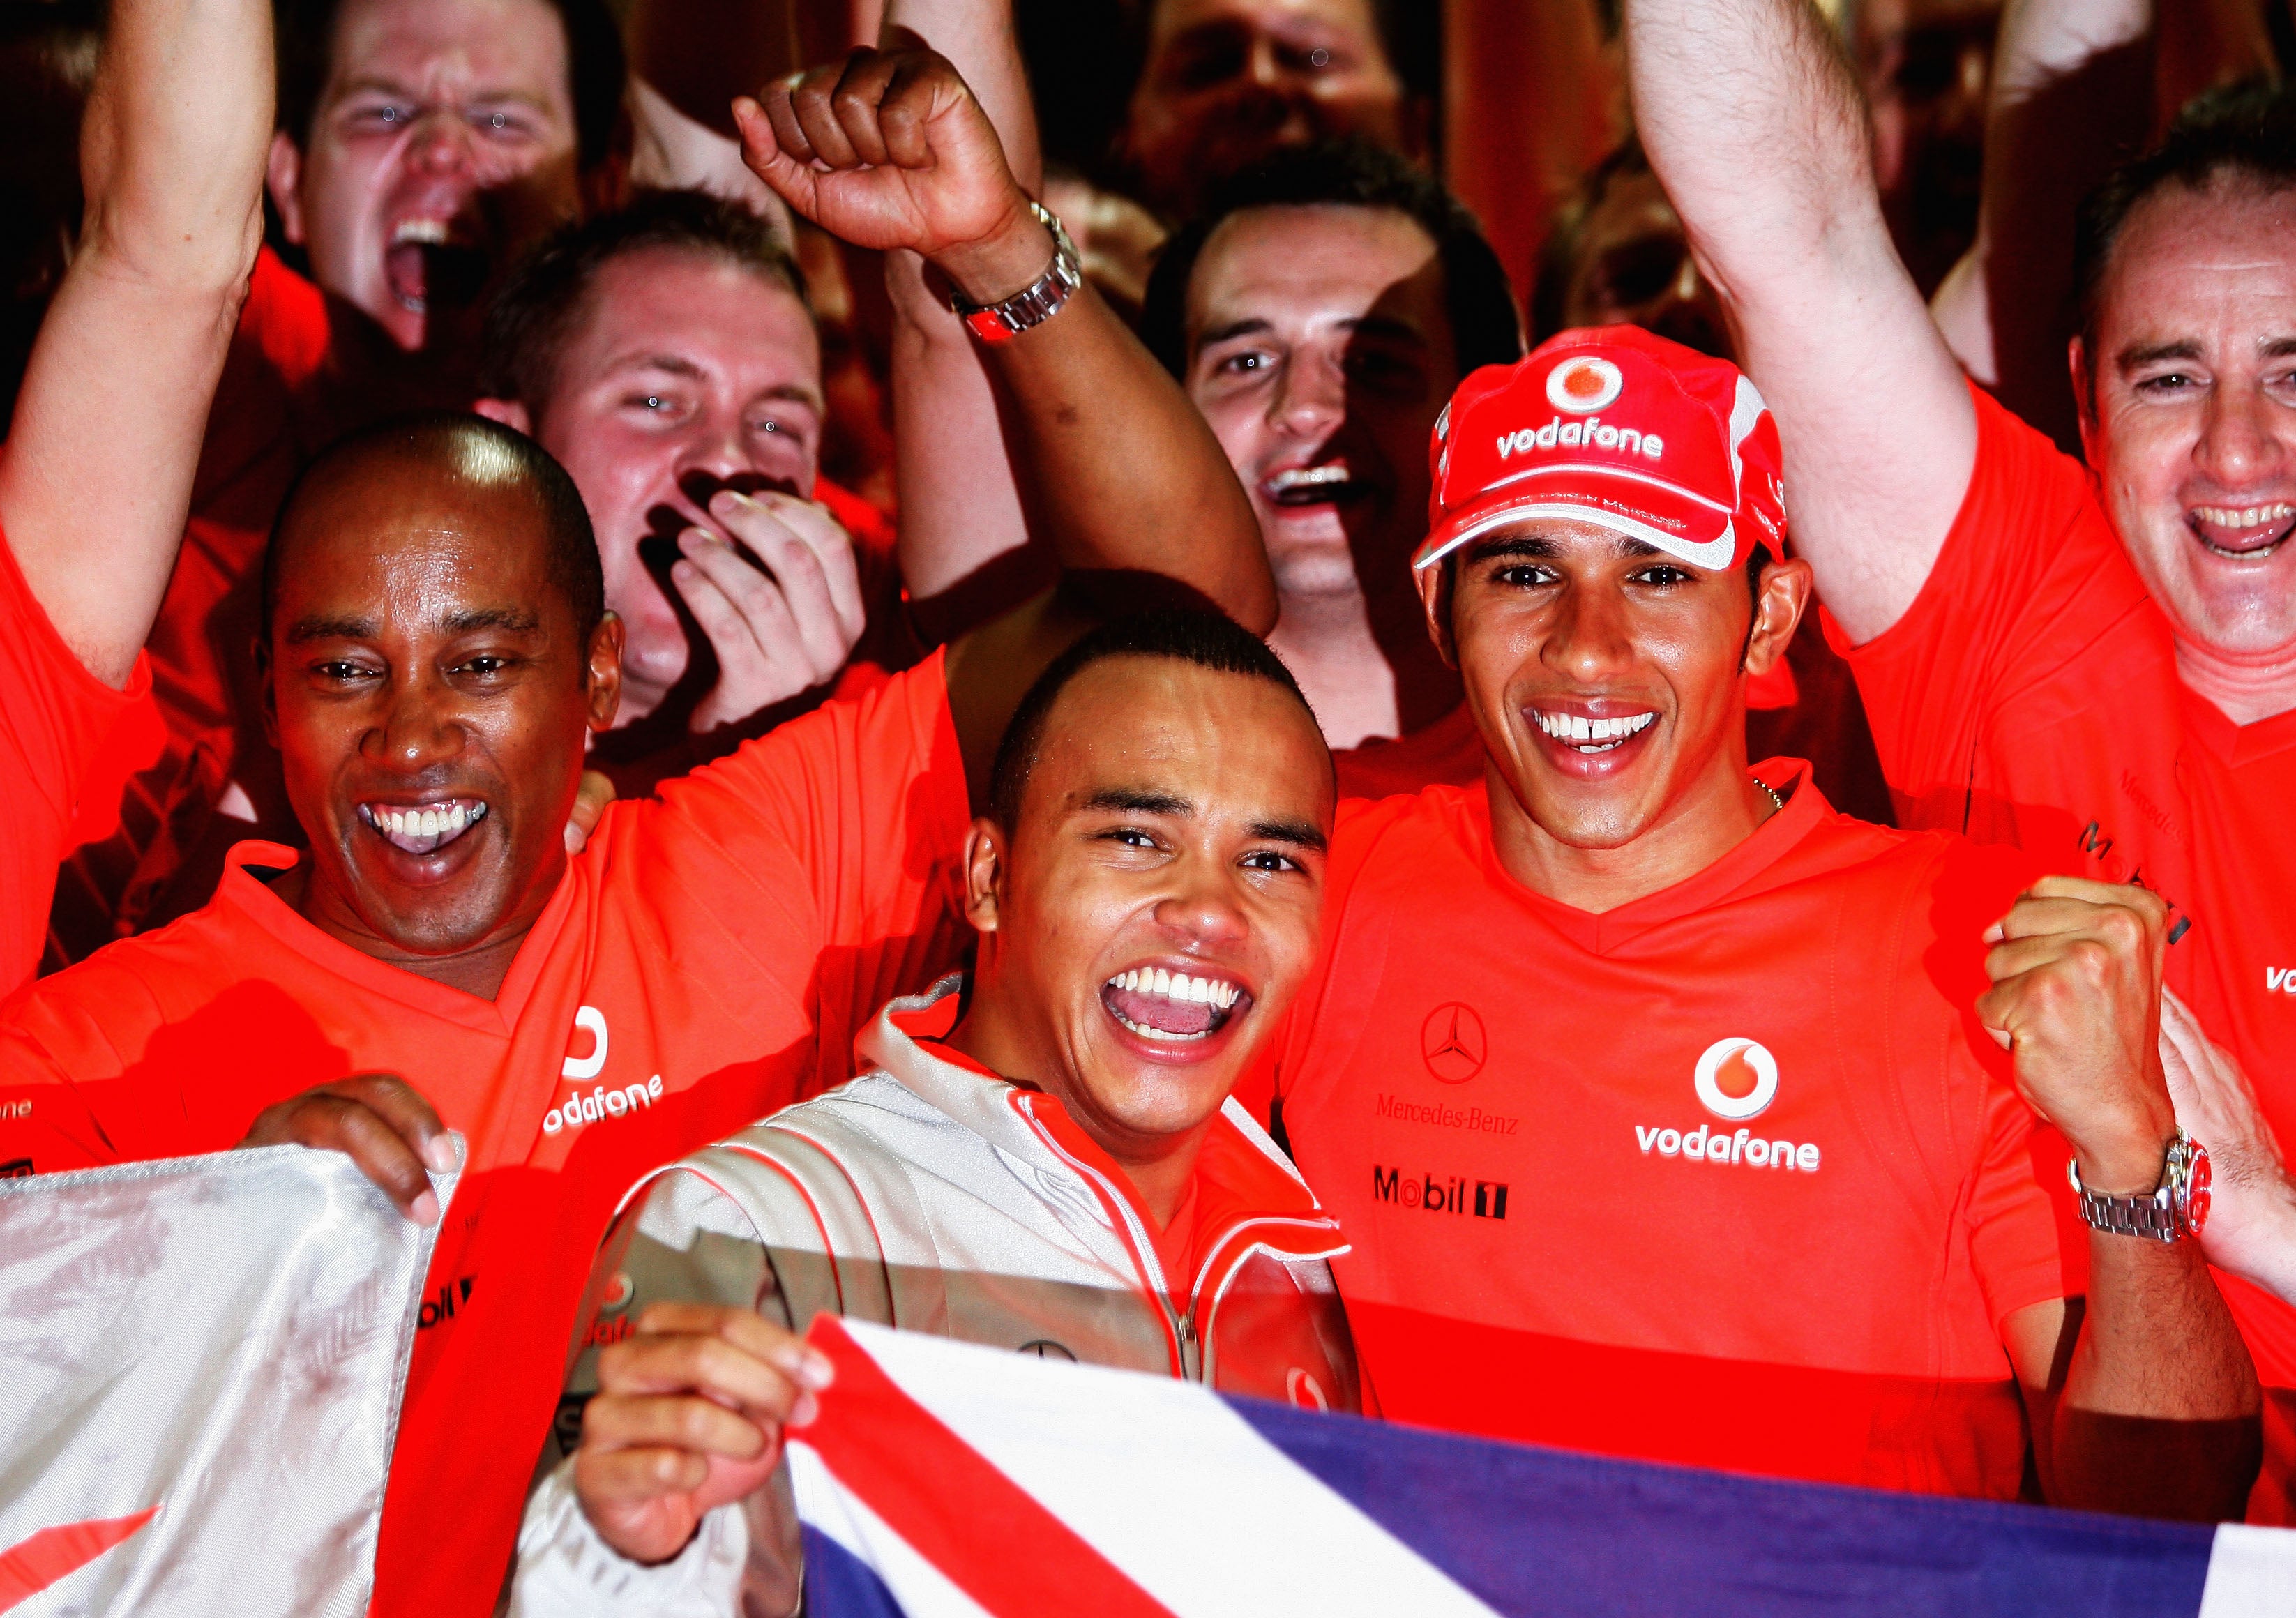 Nicolas Hamilton alongside his brother and father on the day Lewis won the 2008 F1 world title